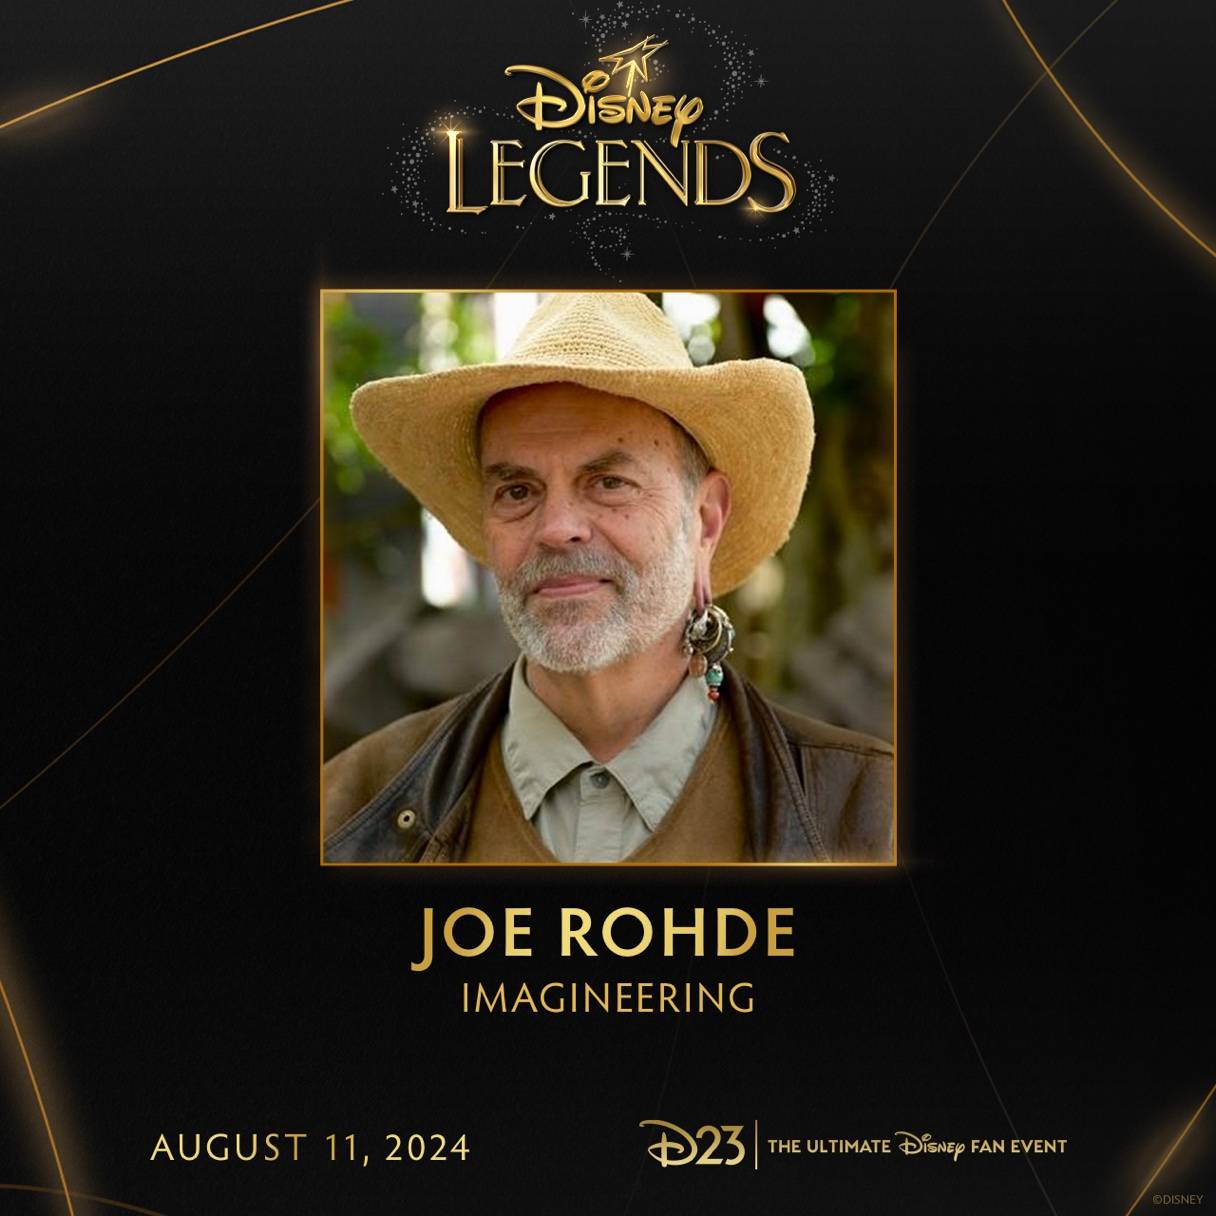 Joe Rohde comments on joining the 2024 class of Disney Legends